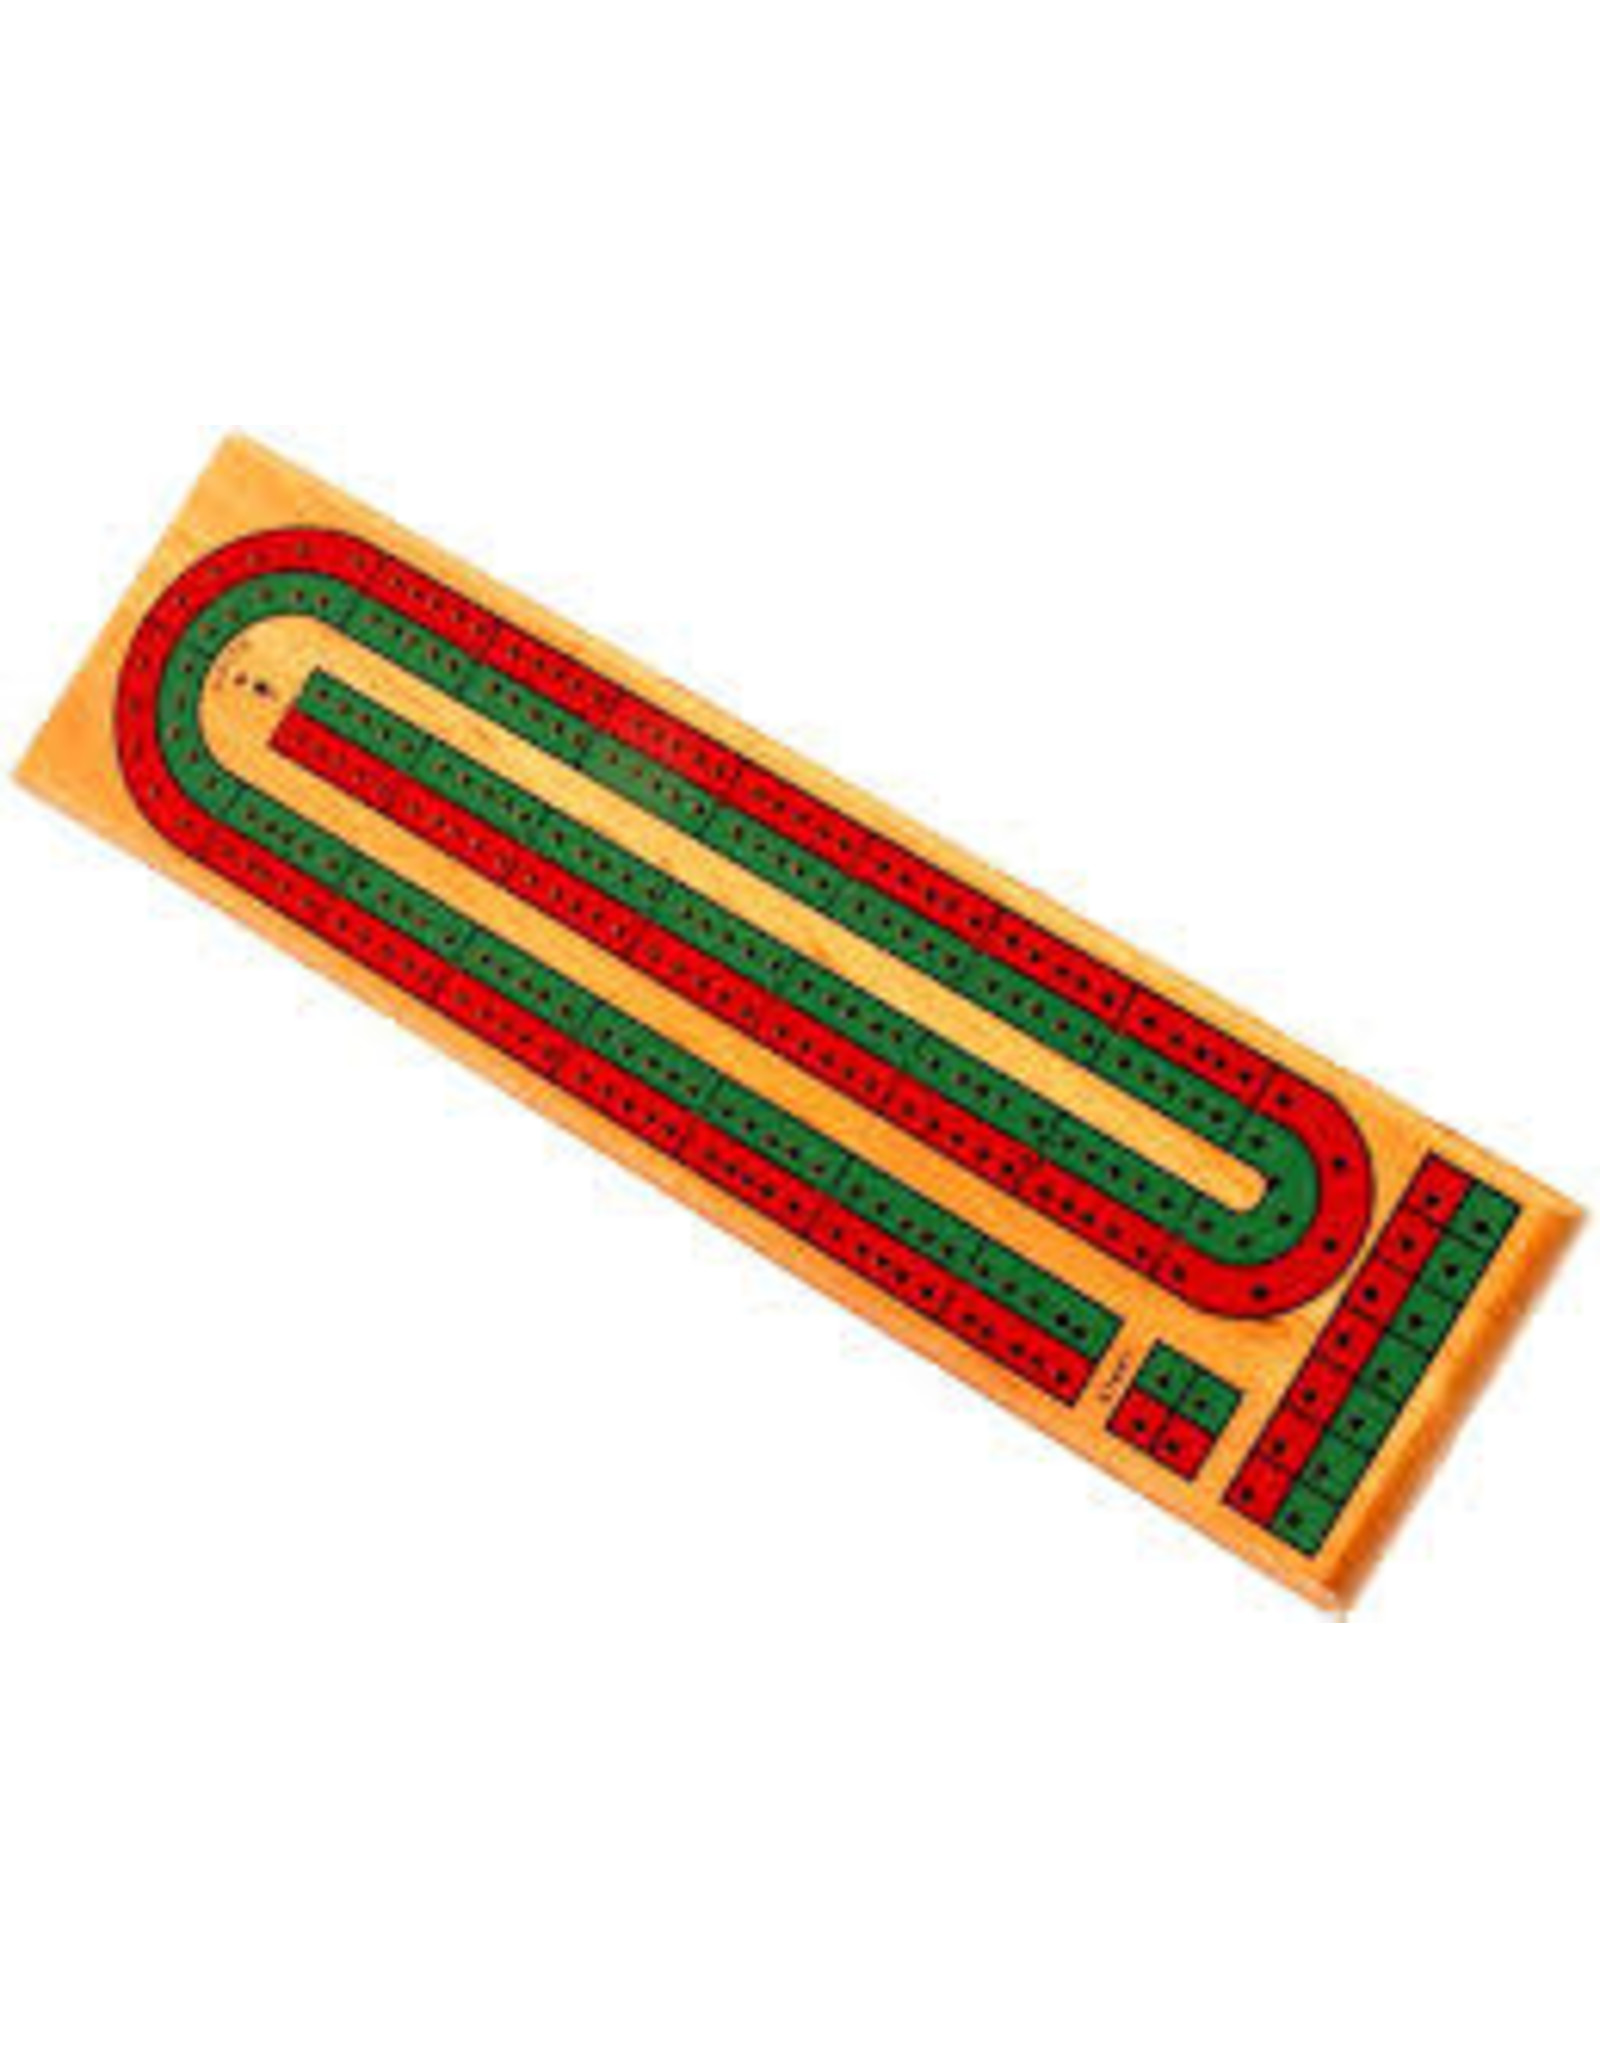 2 Track Cribbage (colors) 13"